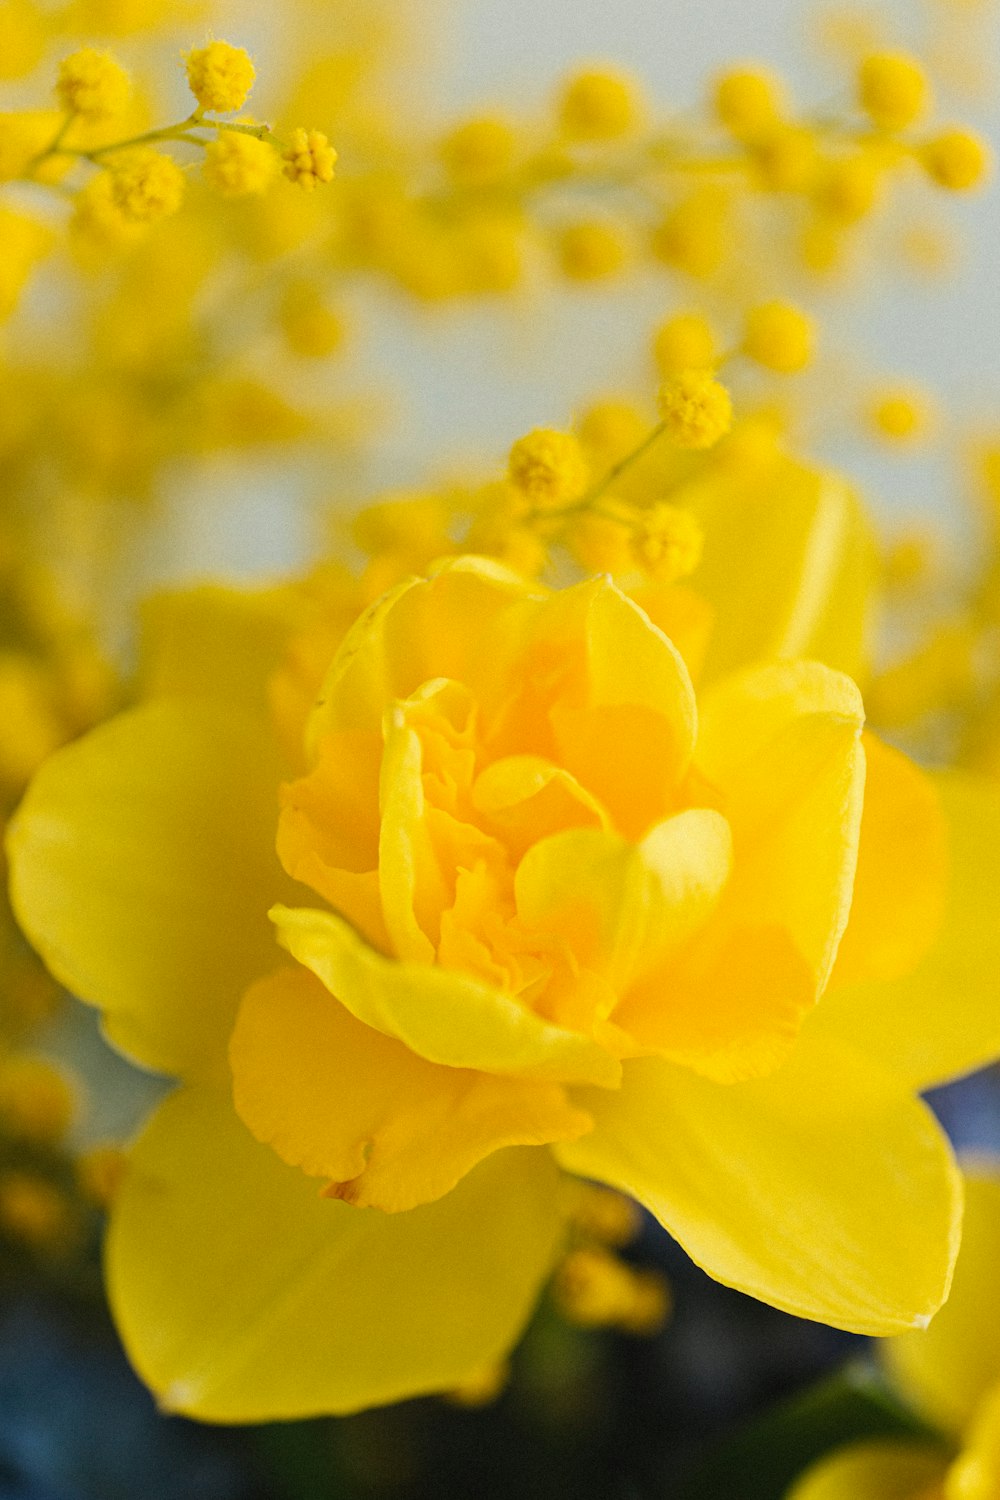 a close up of a yellow flower in a vase